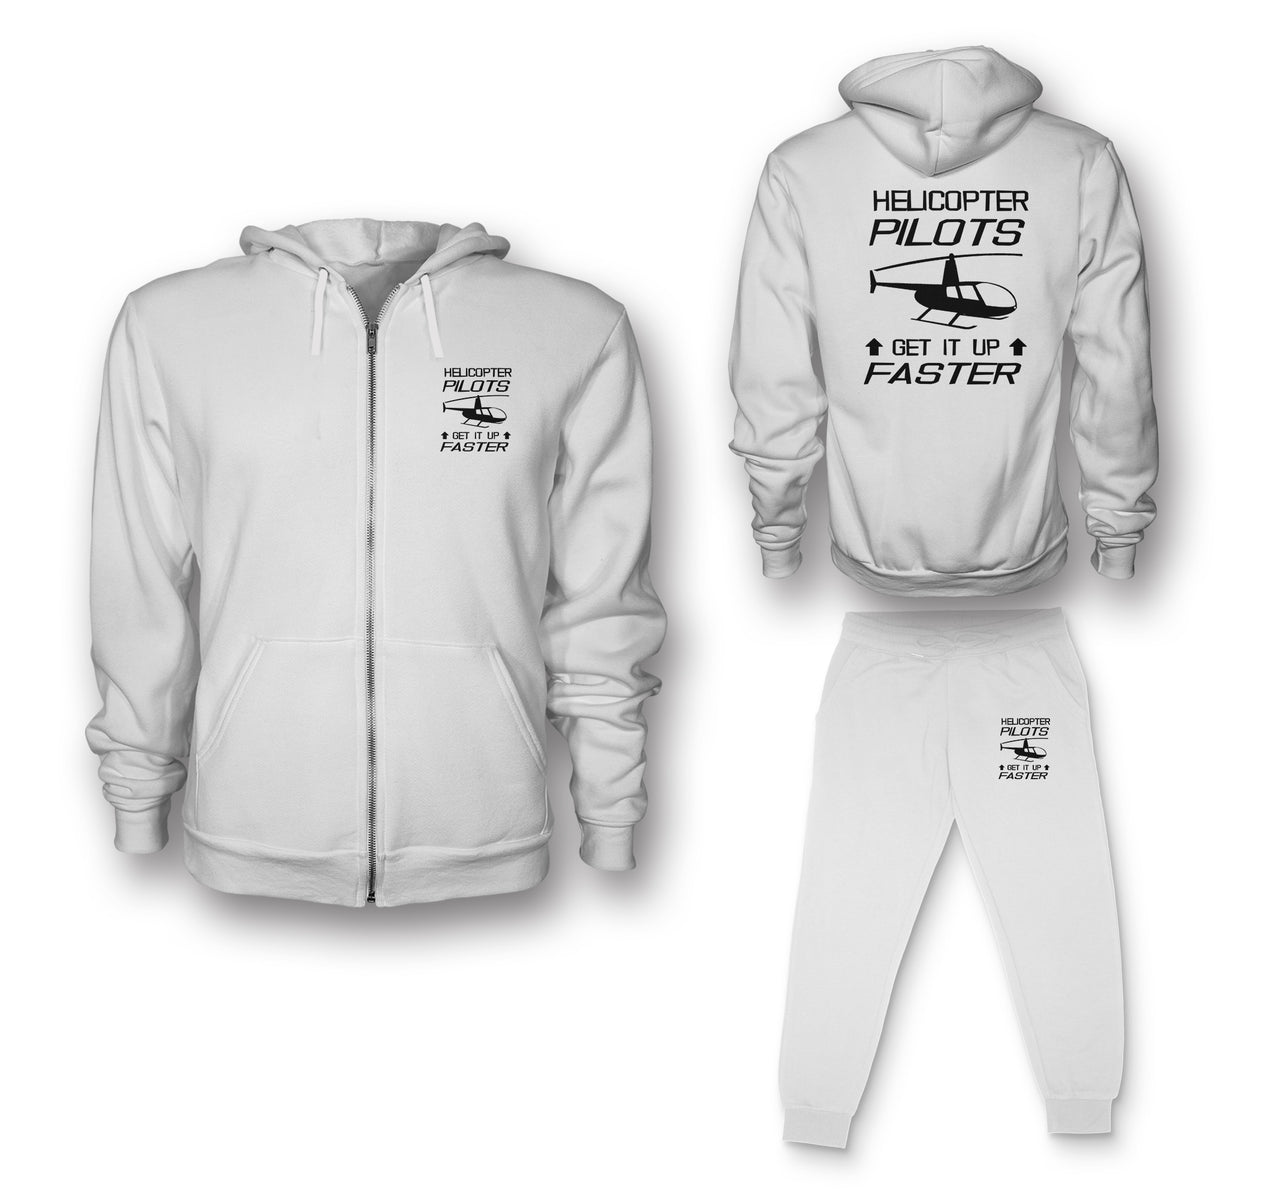 Helicopter Pilots Get It Up Faster Designed Zipped Hoodies & Sweatpants Set